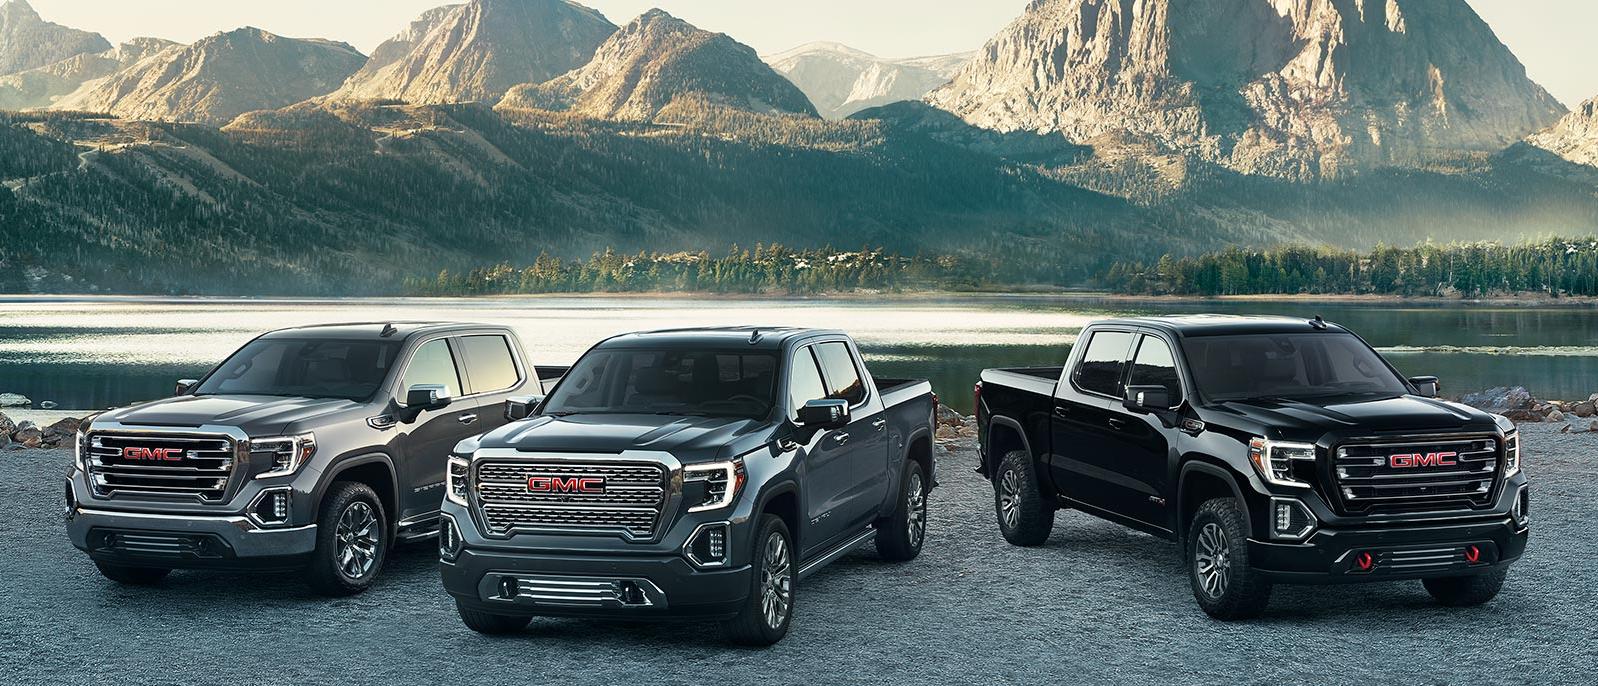 A lineup of GMC Sierra 1500 trucks parked in front of a mountain lake.